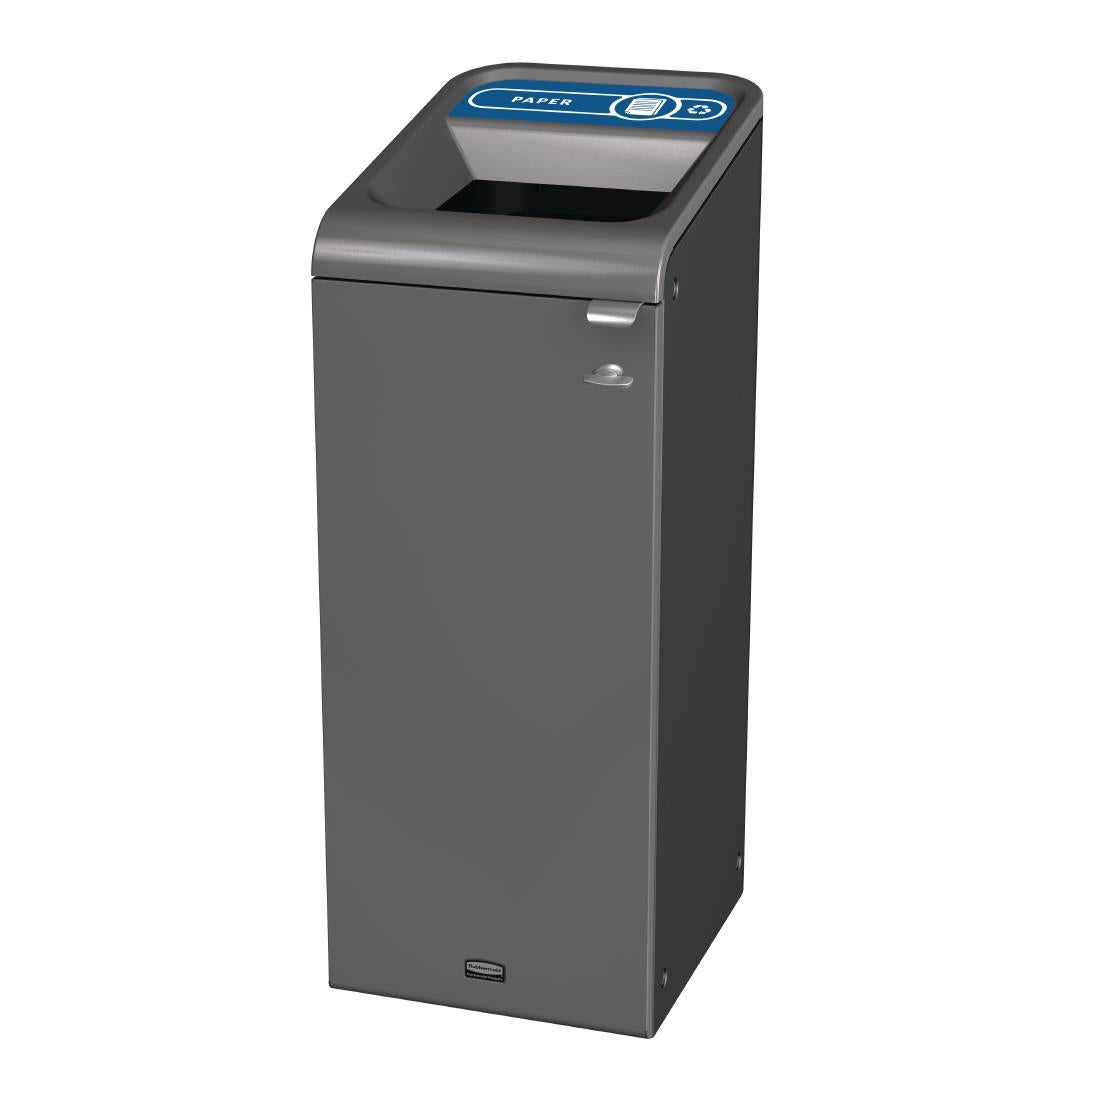 CX975 Rubbermaid Configure Recycling Bin with Paper Recycling Label Blue 57Ltr JD Catering Equipment Solutions Ltd